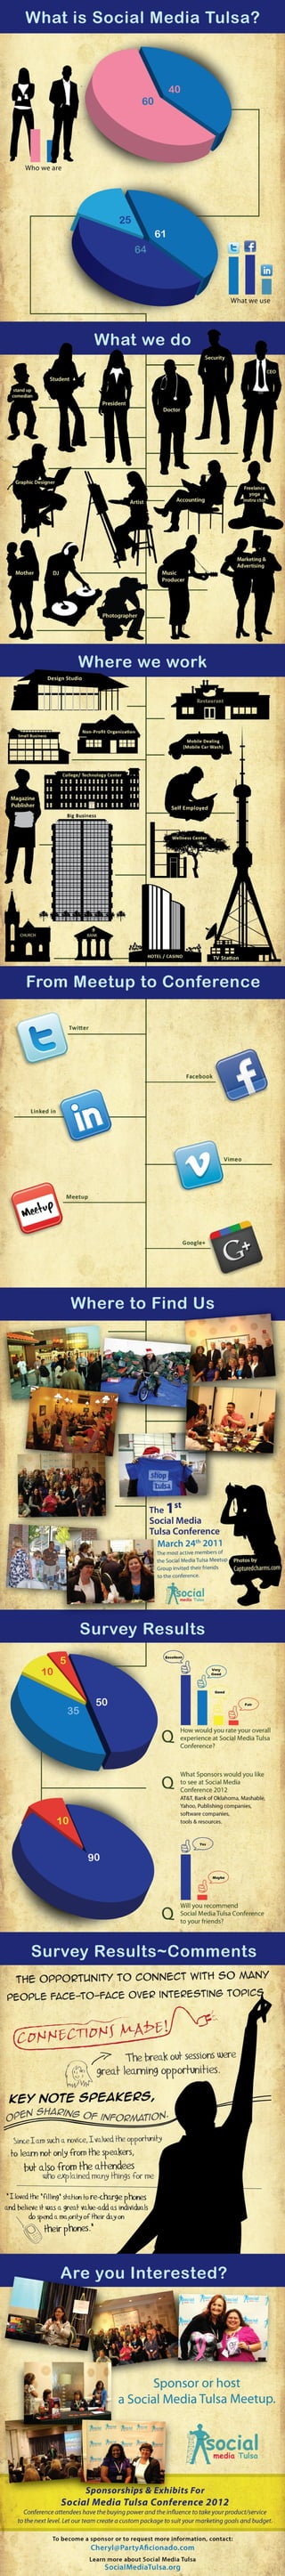 What is Social Media Tulsa [Infographic]